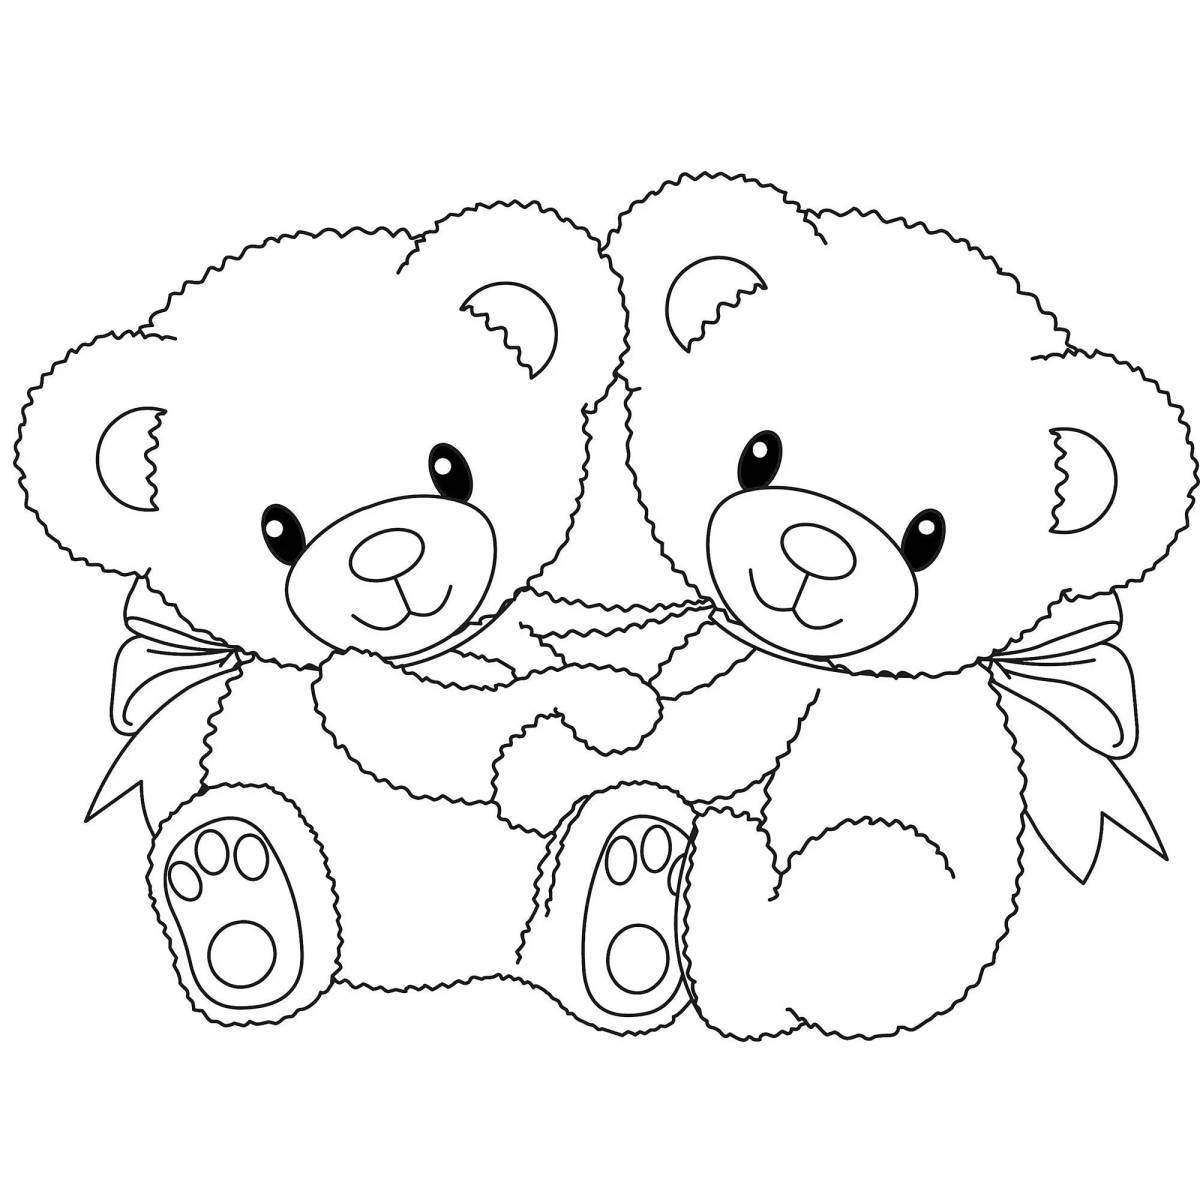 Coloring page cozy teddy bear with a heart